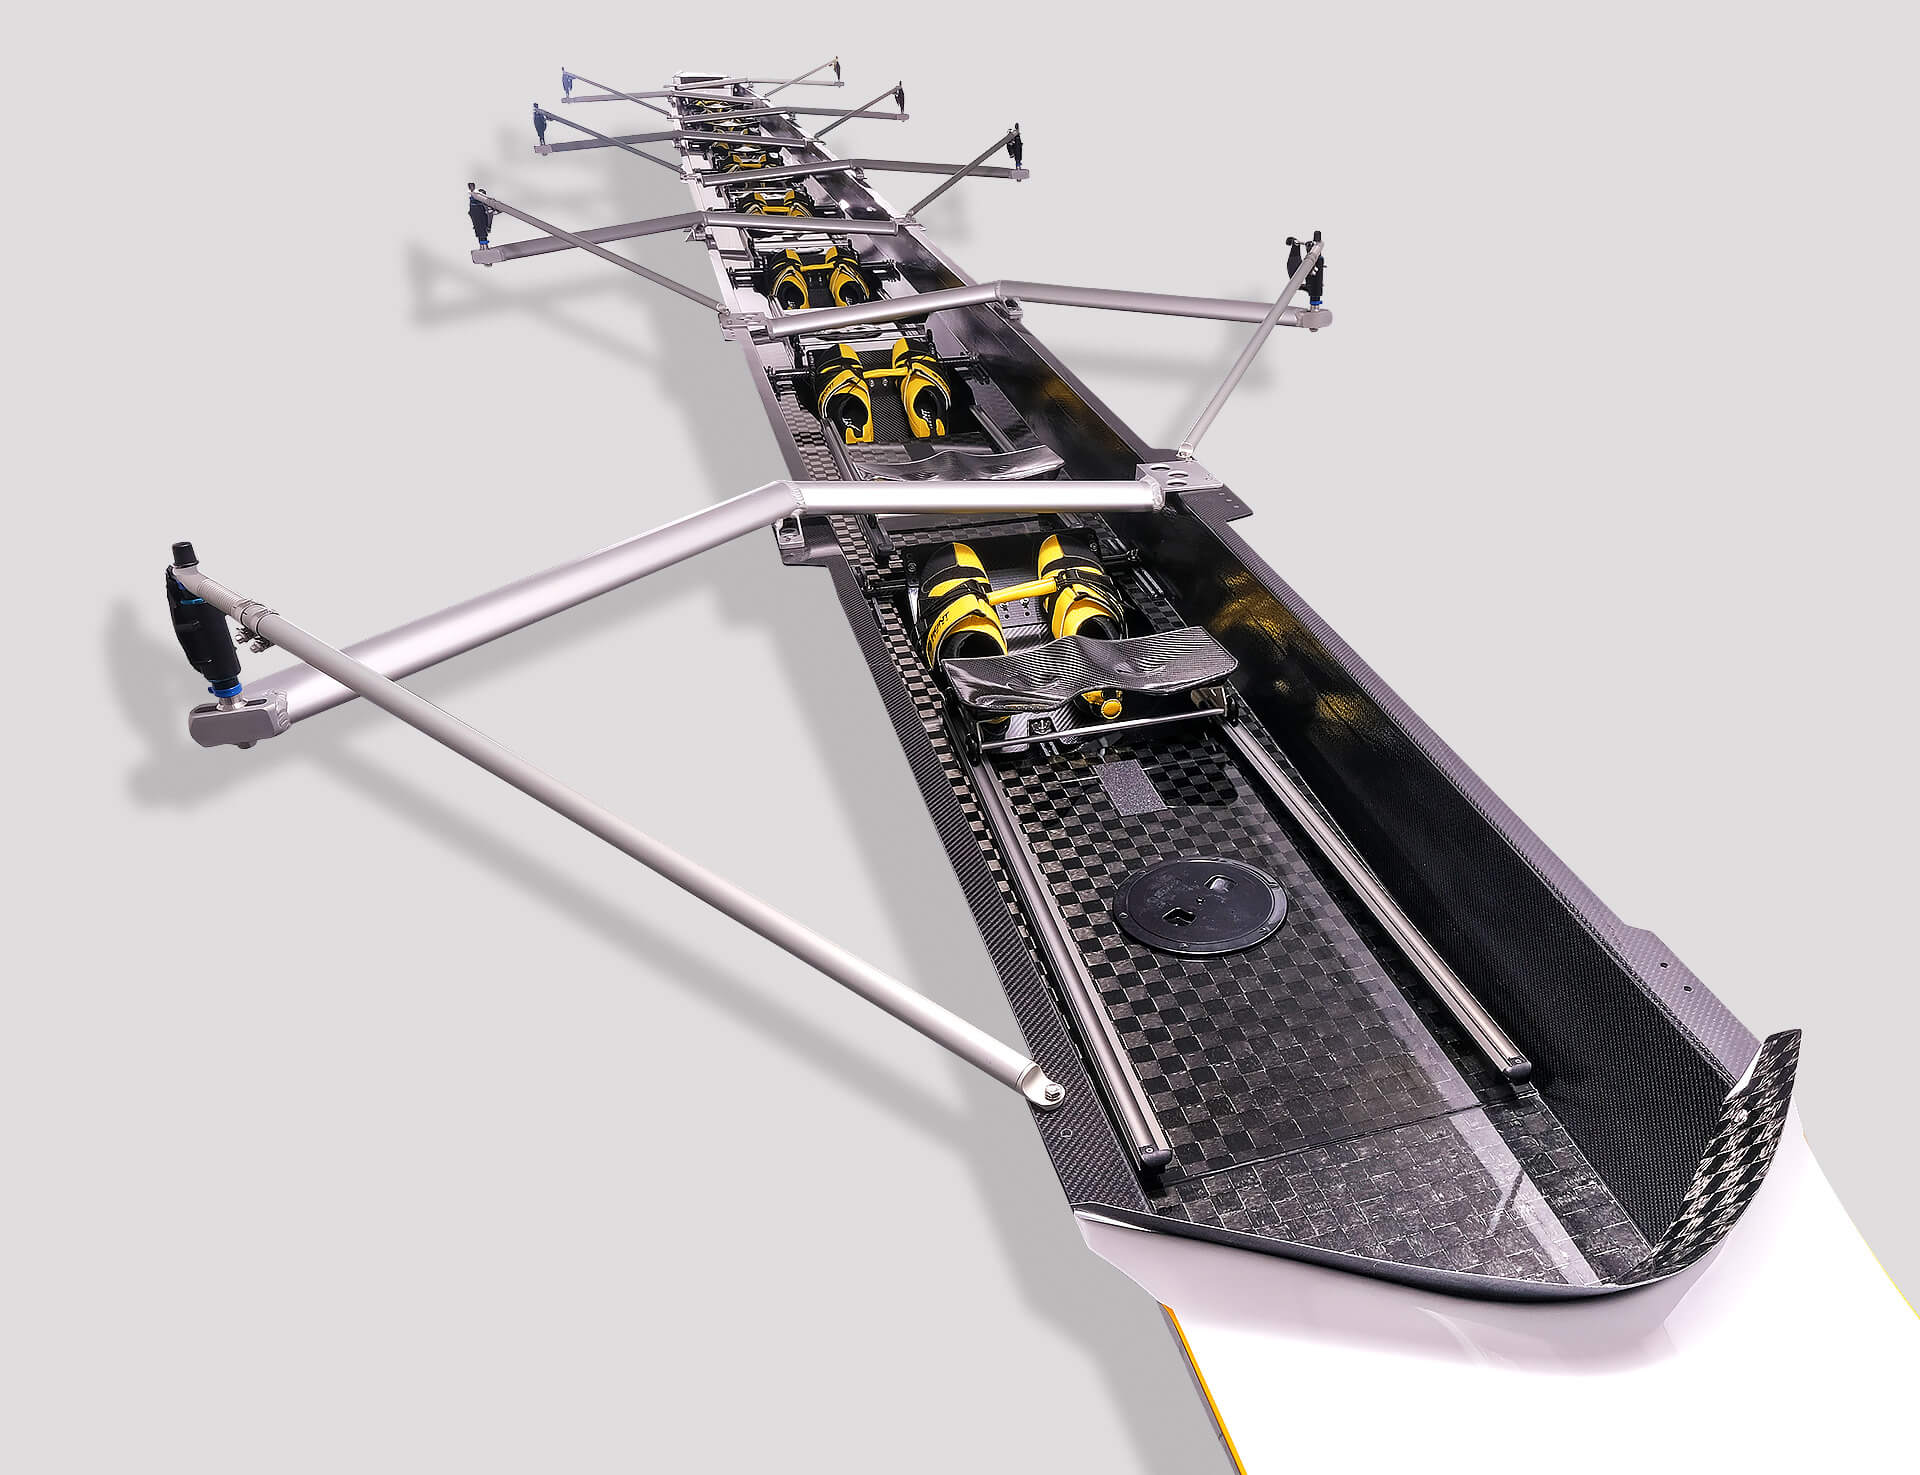 product shot of the SL Racing eights-rowing-boat-skiff-models with aluminium rigging and yellow and black shoes inside.